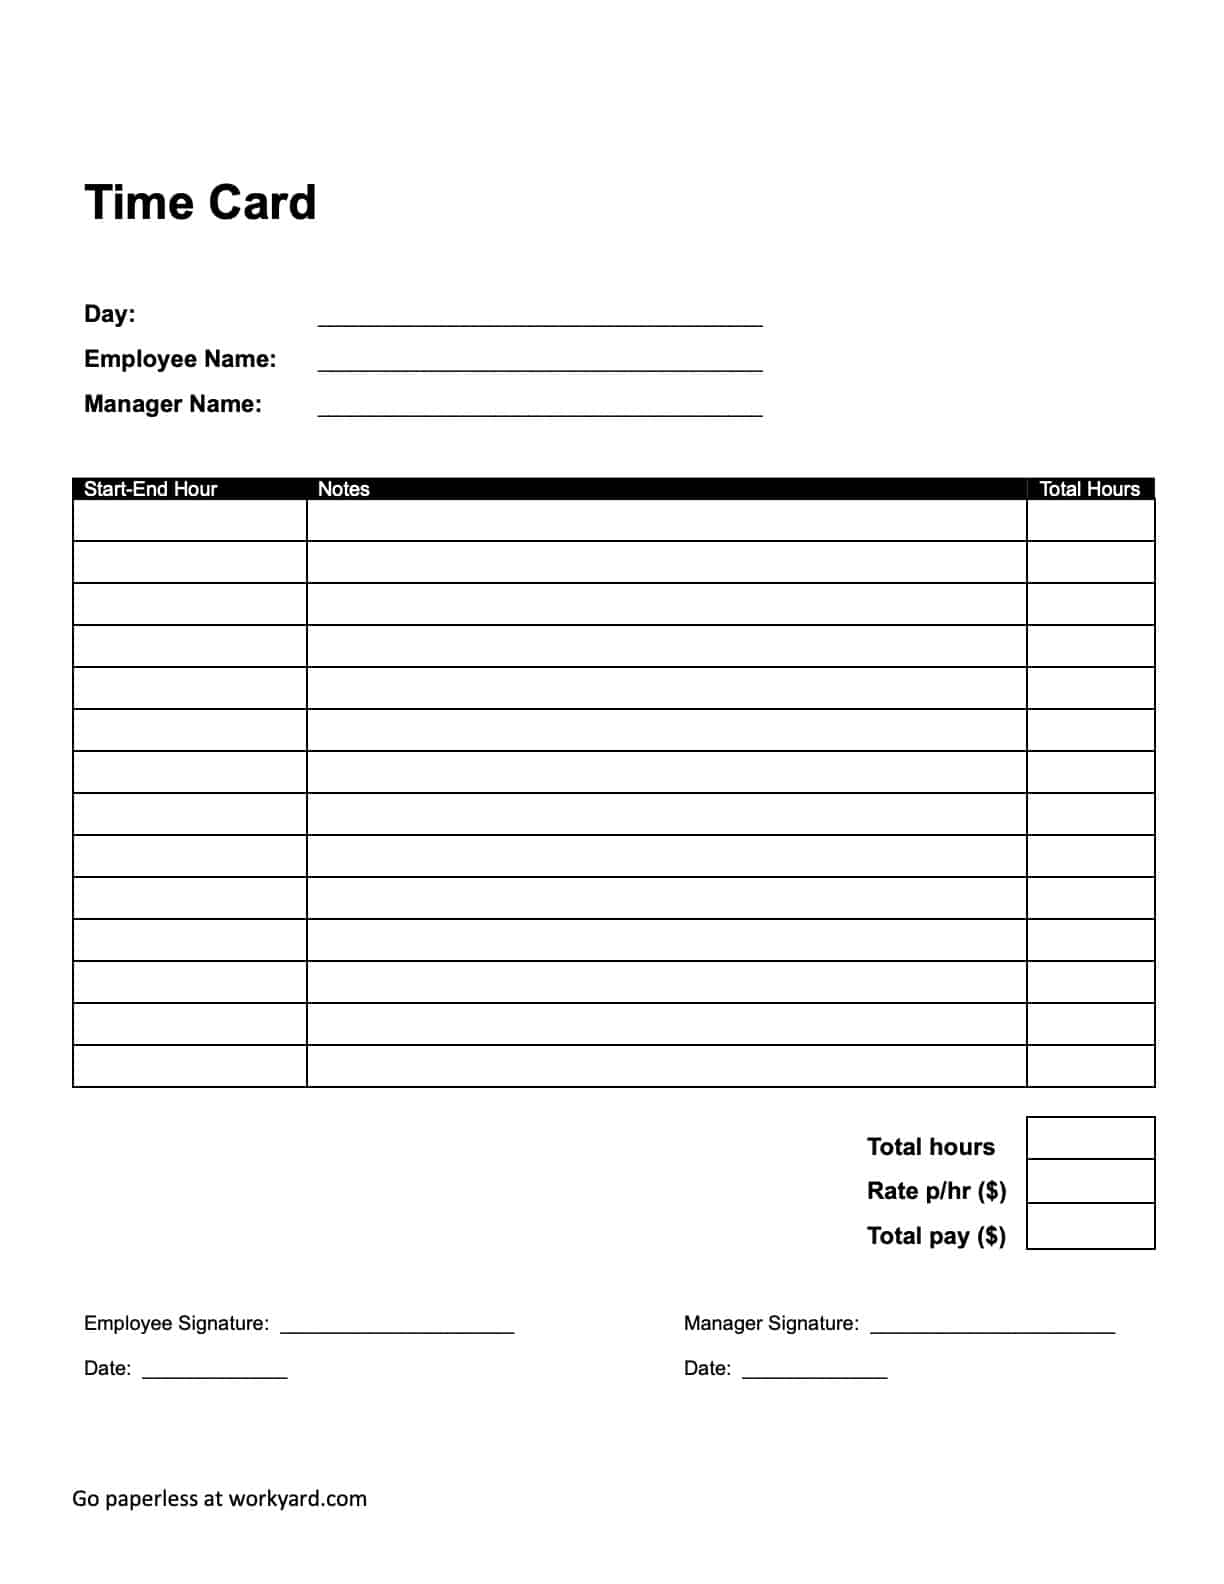 Construction Timesheet Templates: Download Print for Free